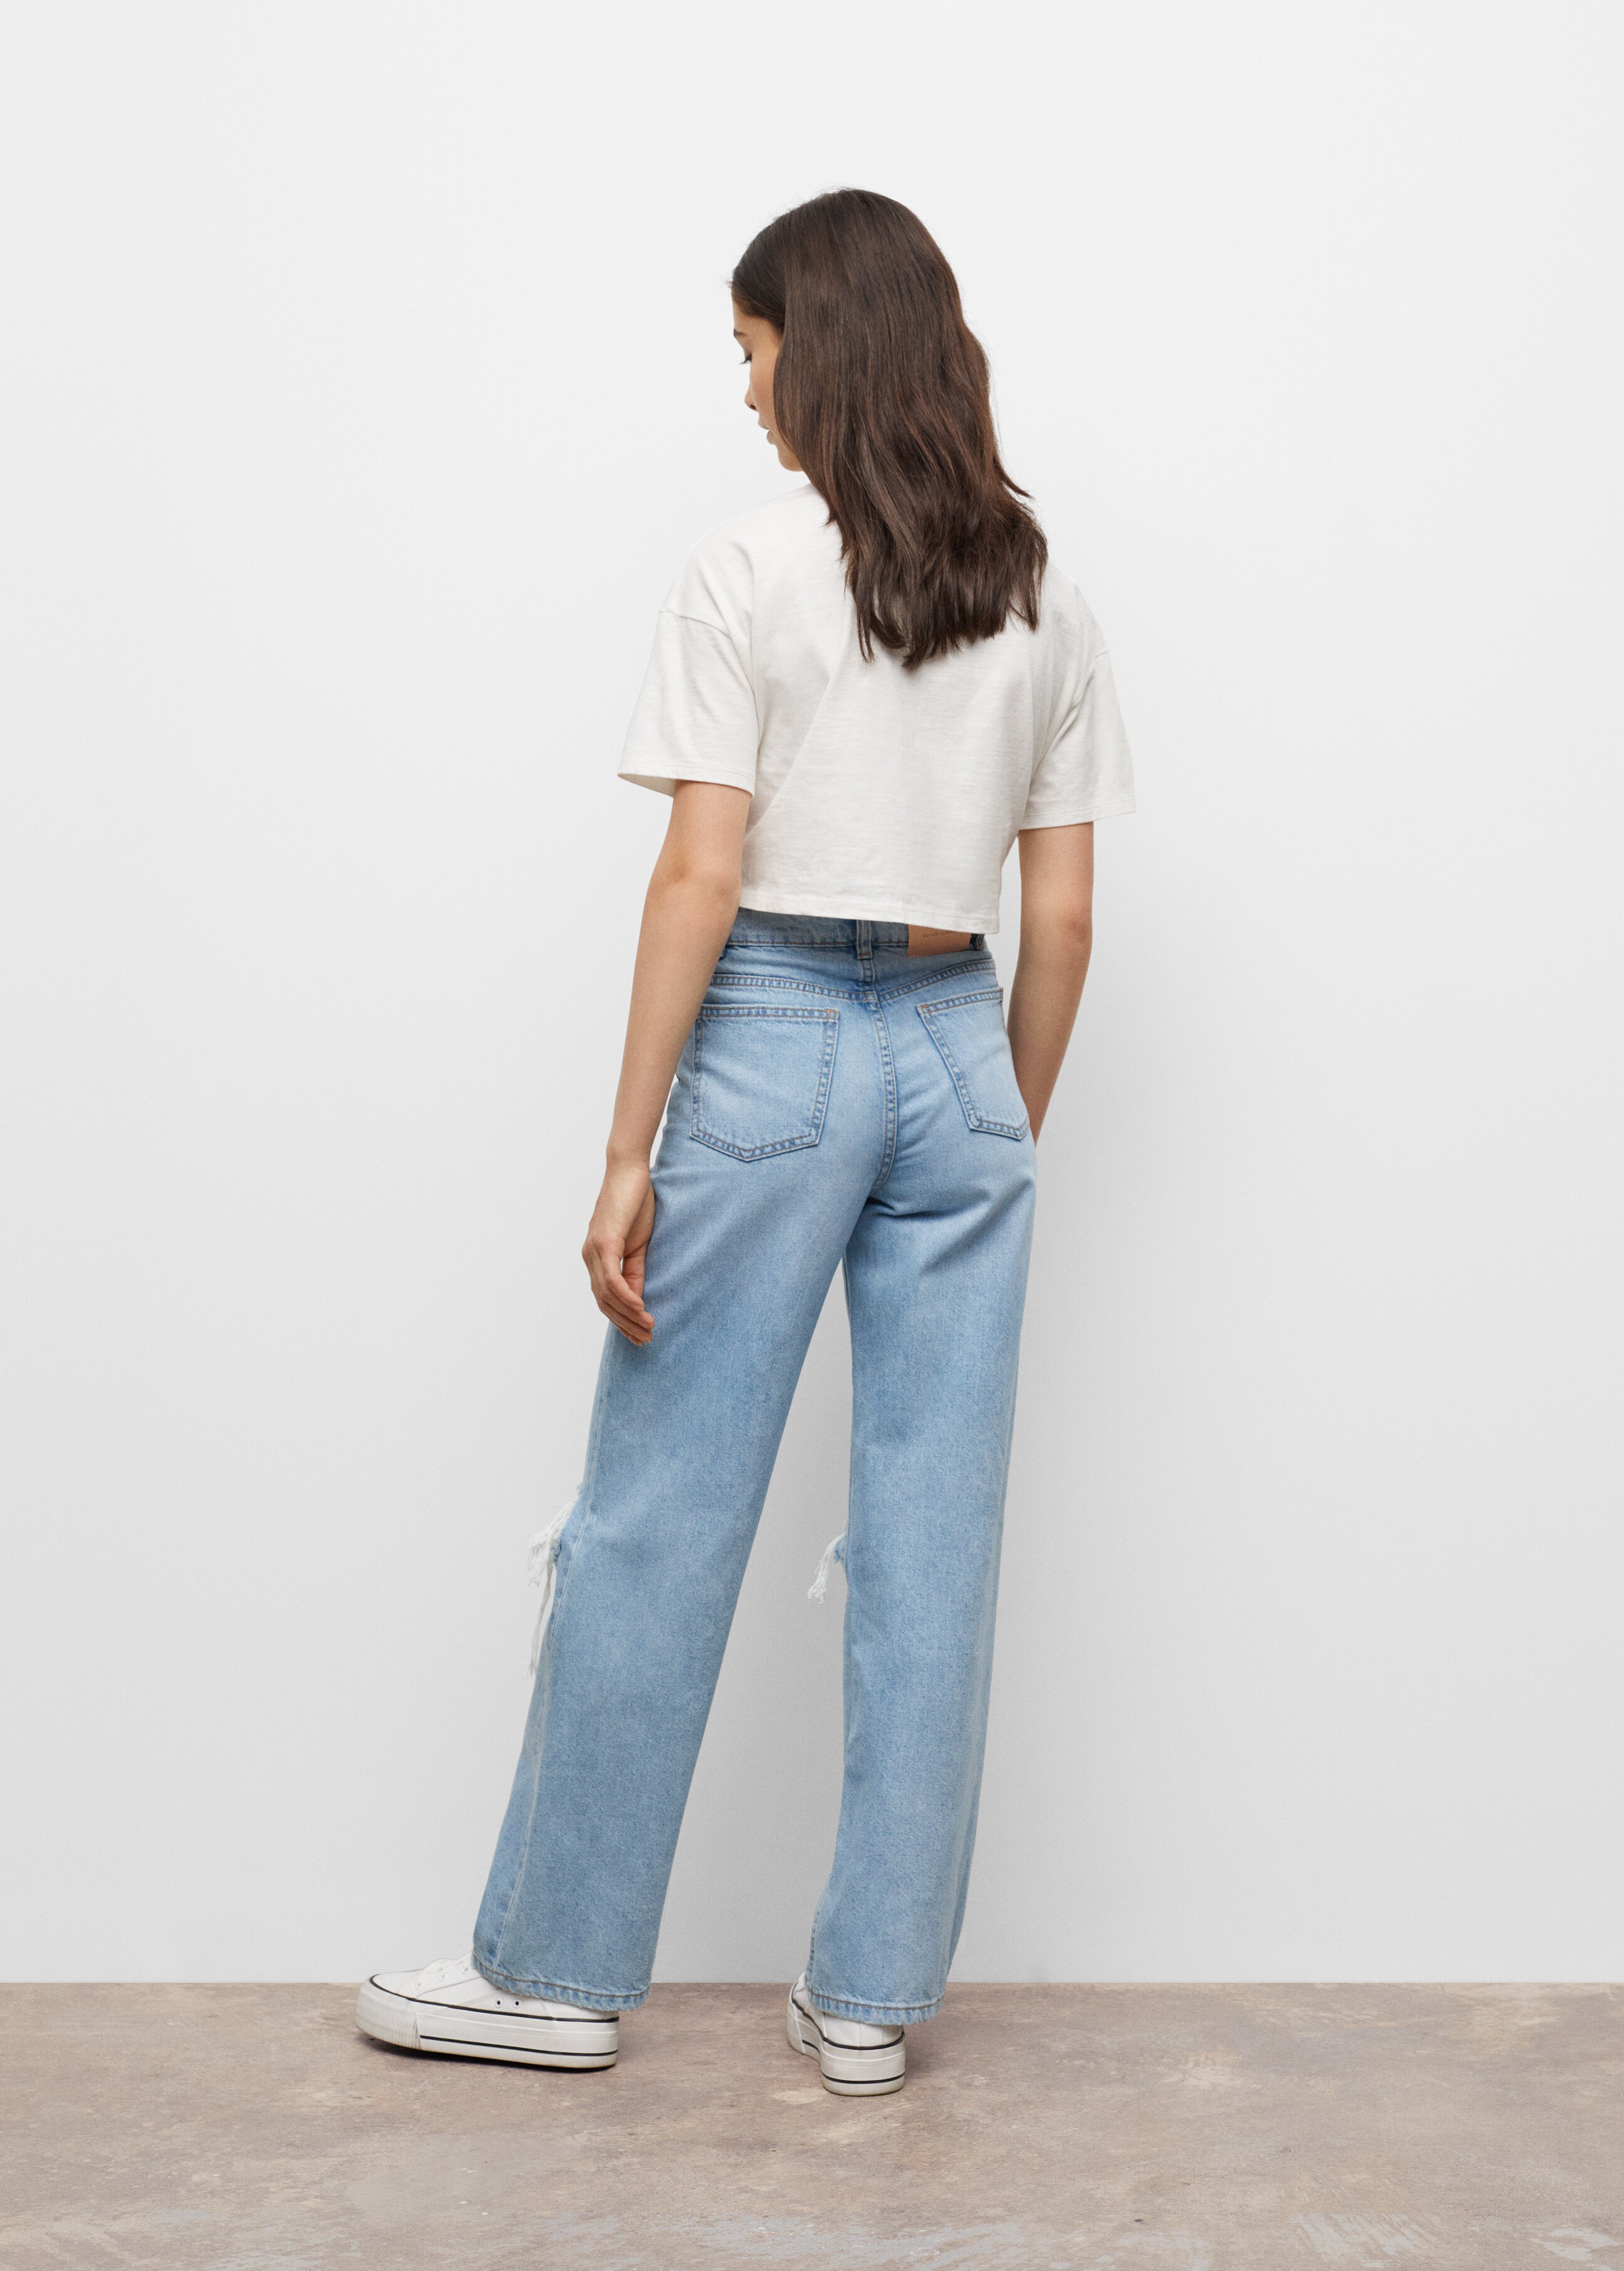 Decorative ripped wideleg jeans - Reverse of the article